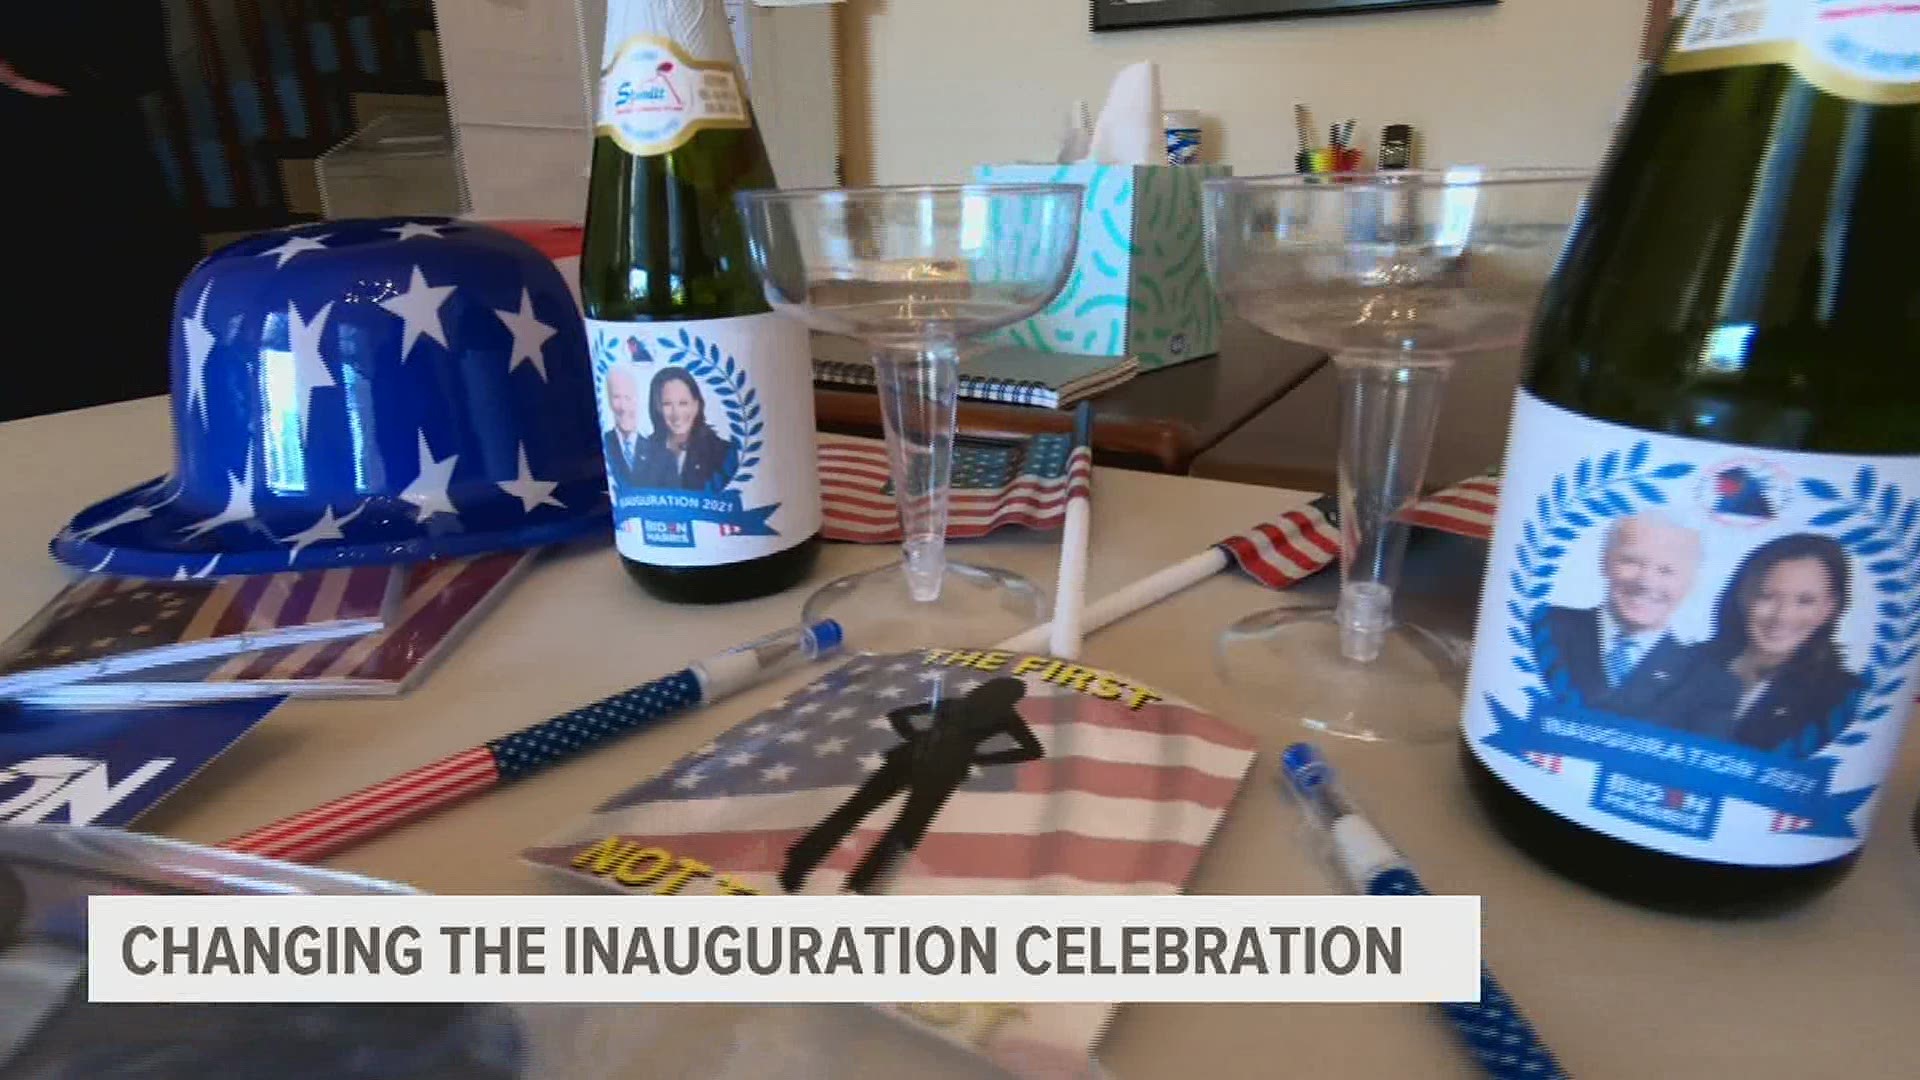 Many local supporters plan to celebrate the inauguration of Pennsylvania-native Biden in a different way as history is set to be made in DC